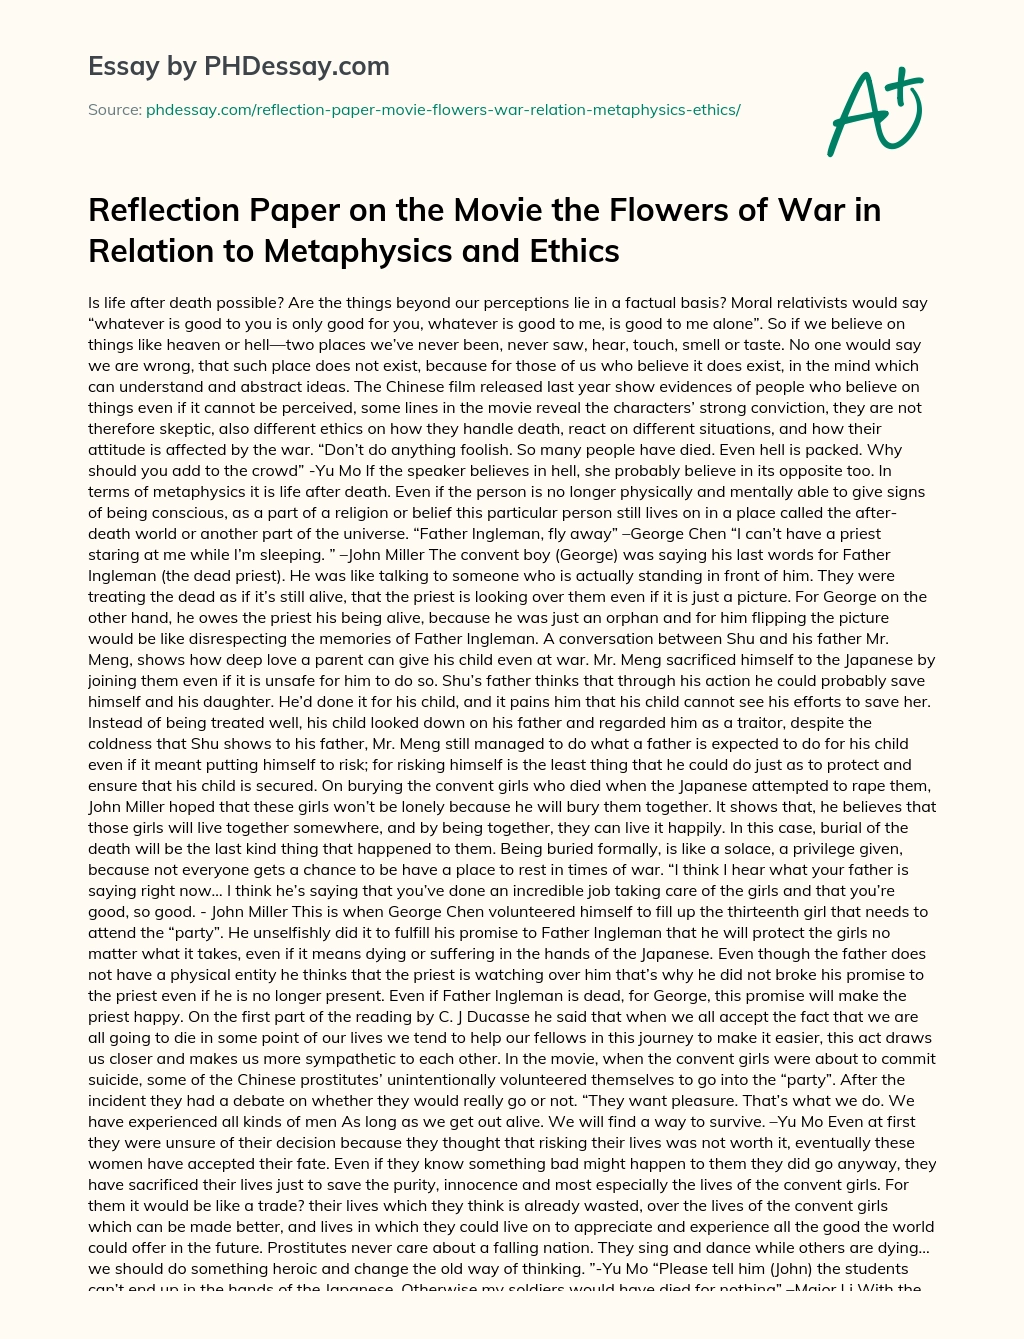 Reflection Paper on the Movie the Flowers of War in Relation to Metaphysics and Ethics essay